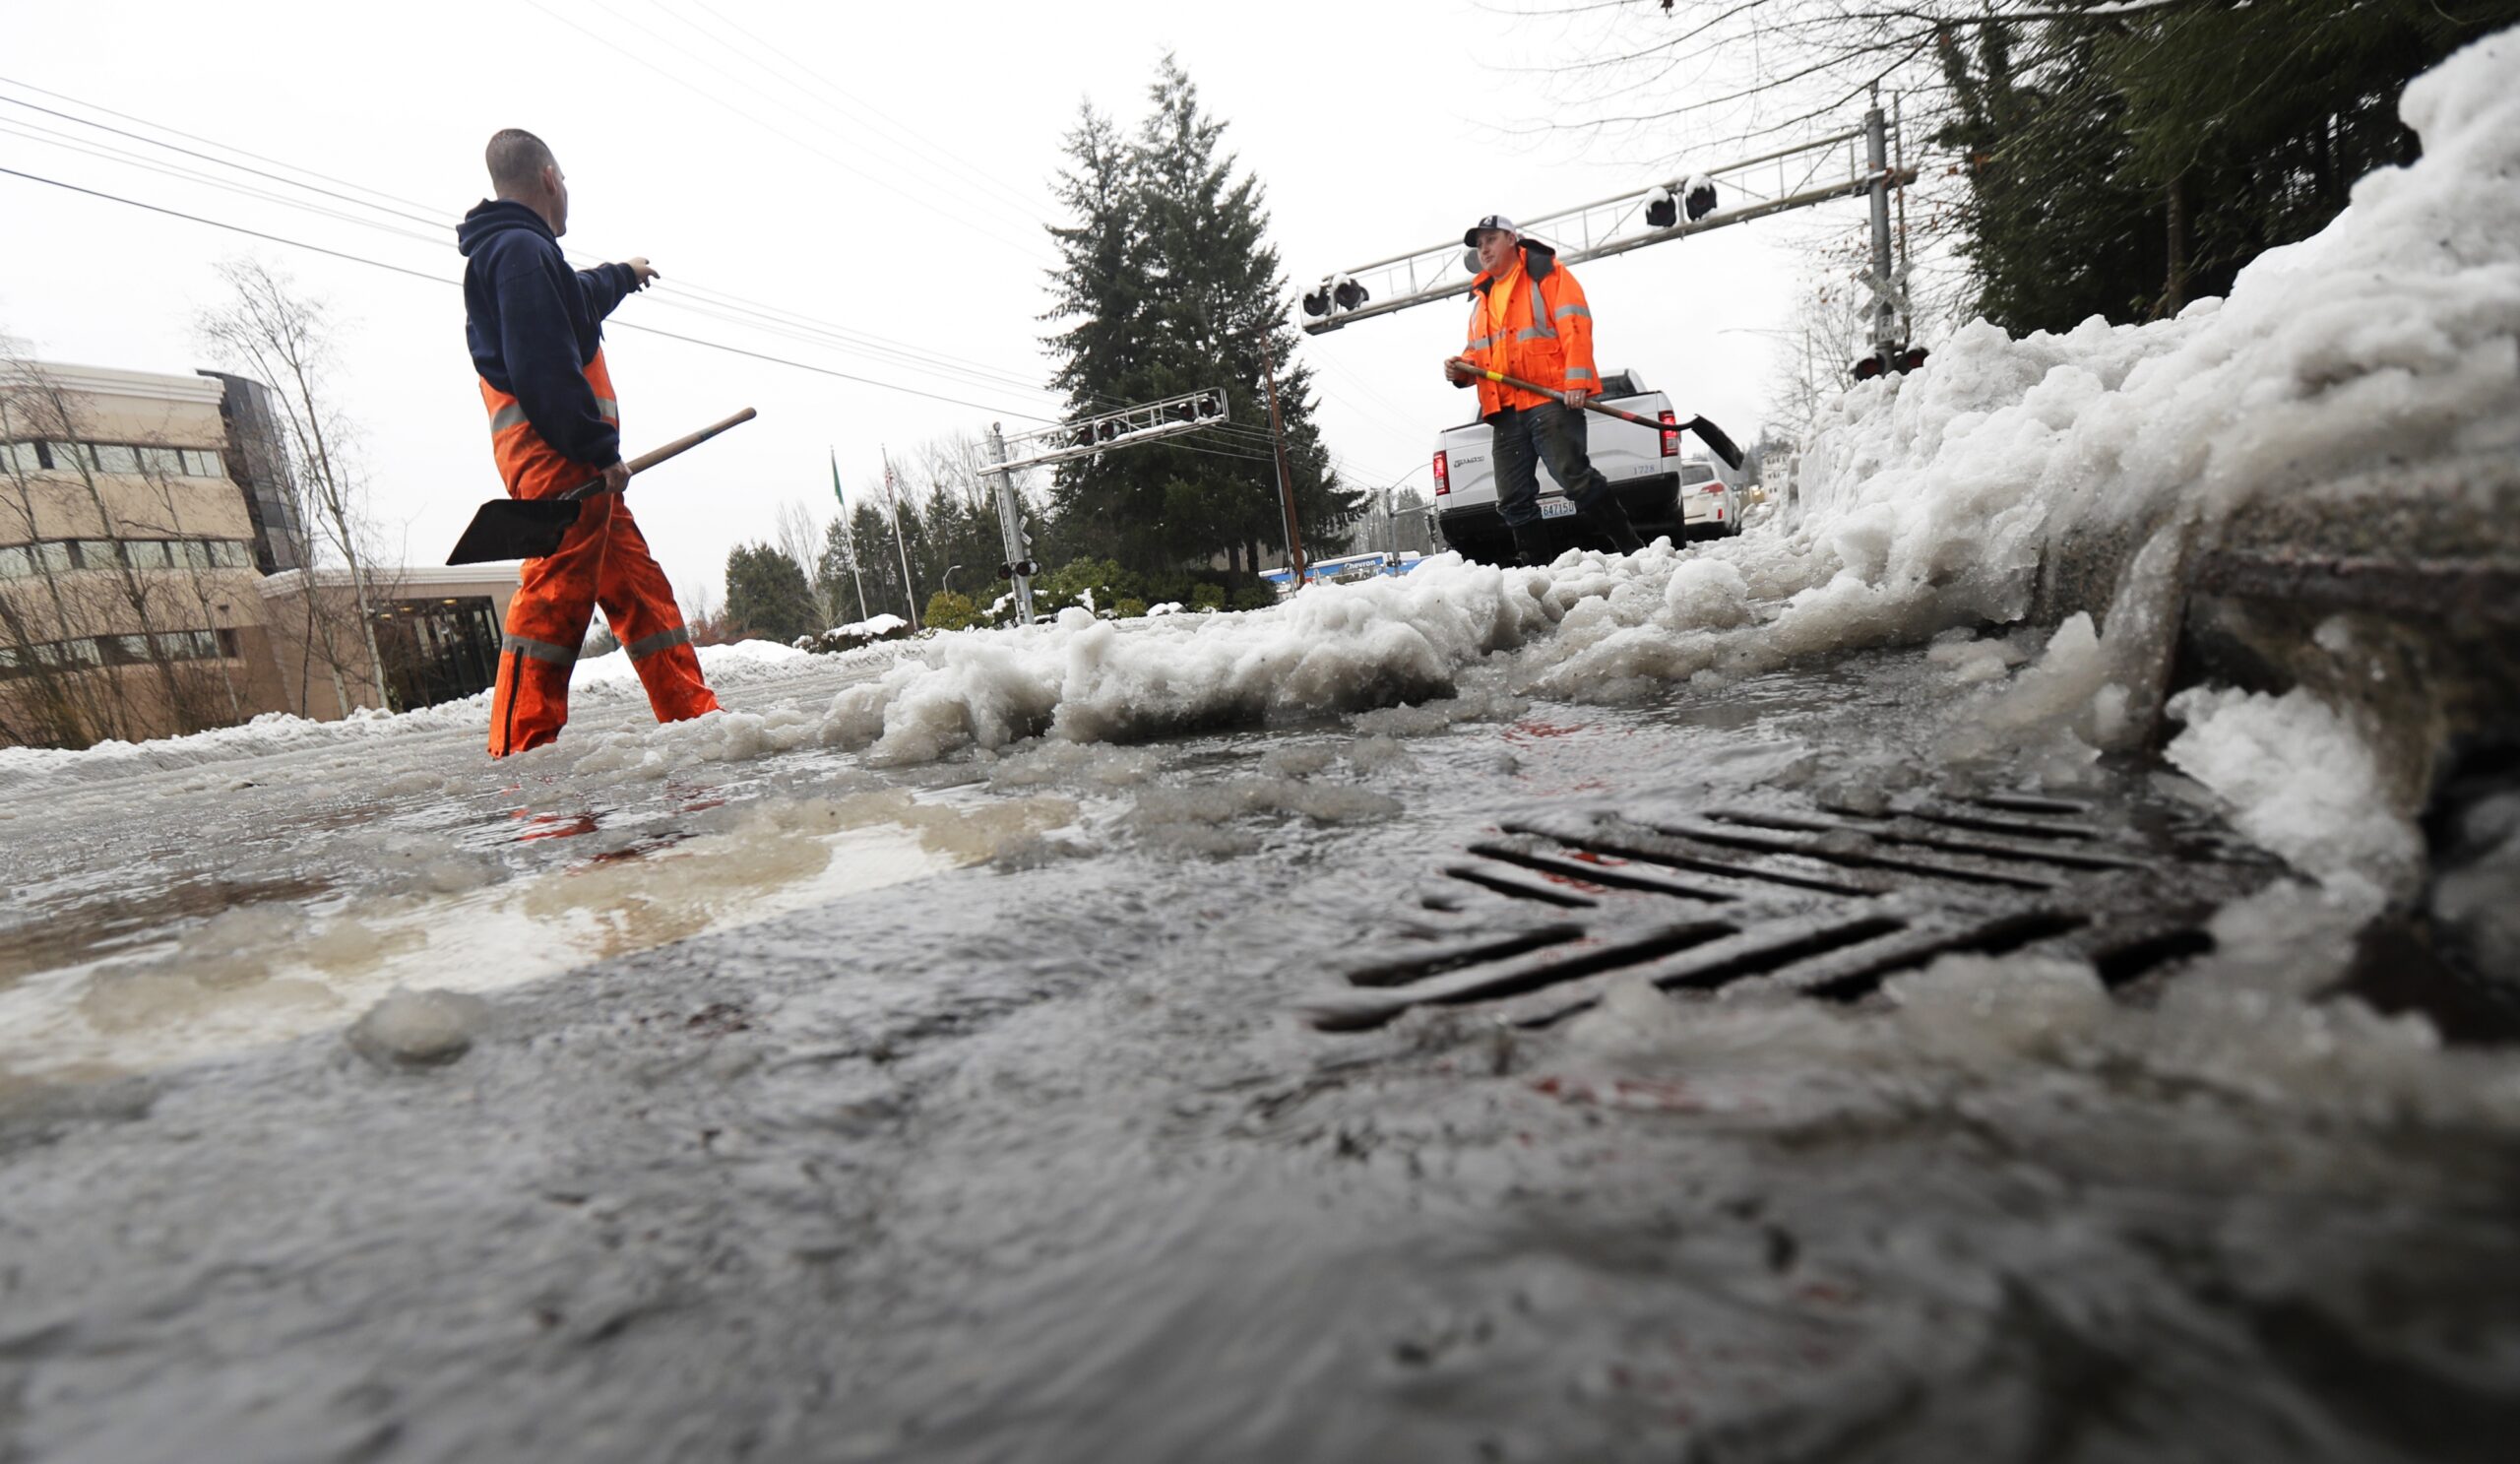 workers clear melting snow from a street drain